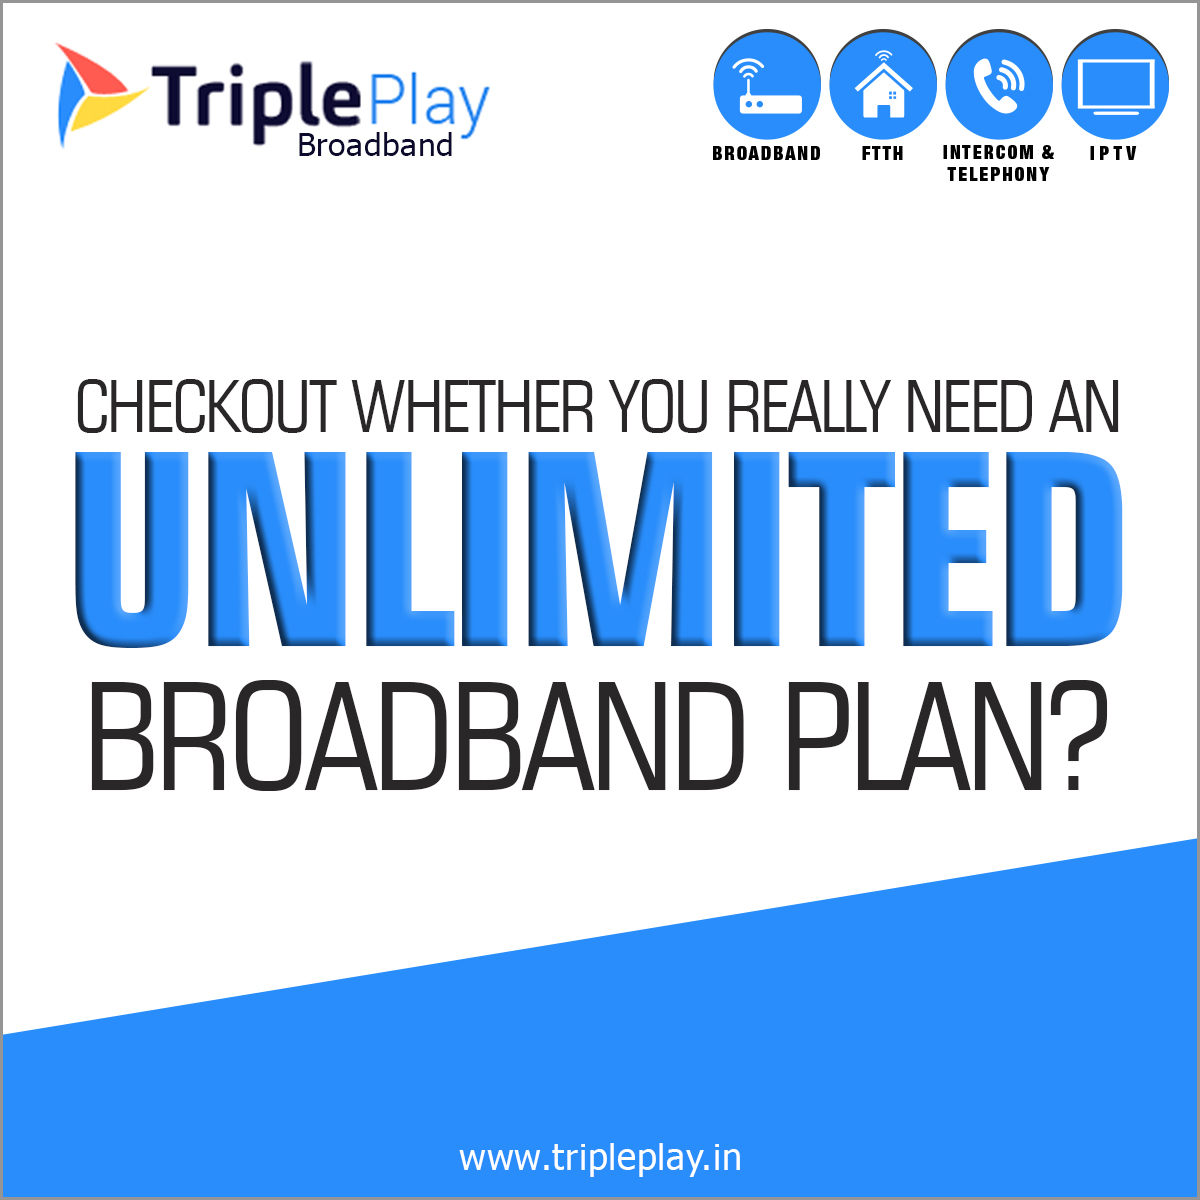 Checkout Whether You Really Need an Unlimited Broadband Plan?